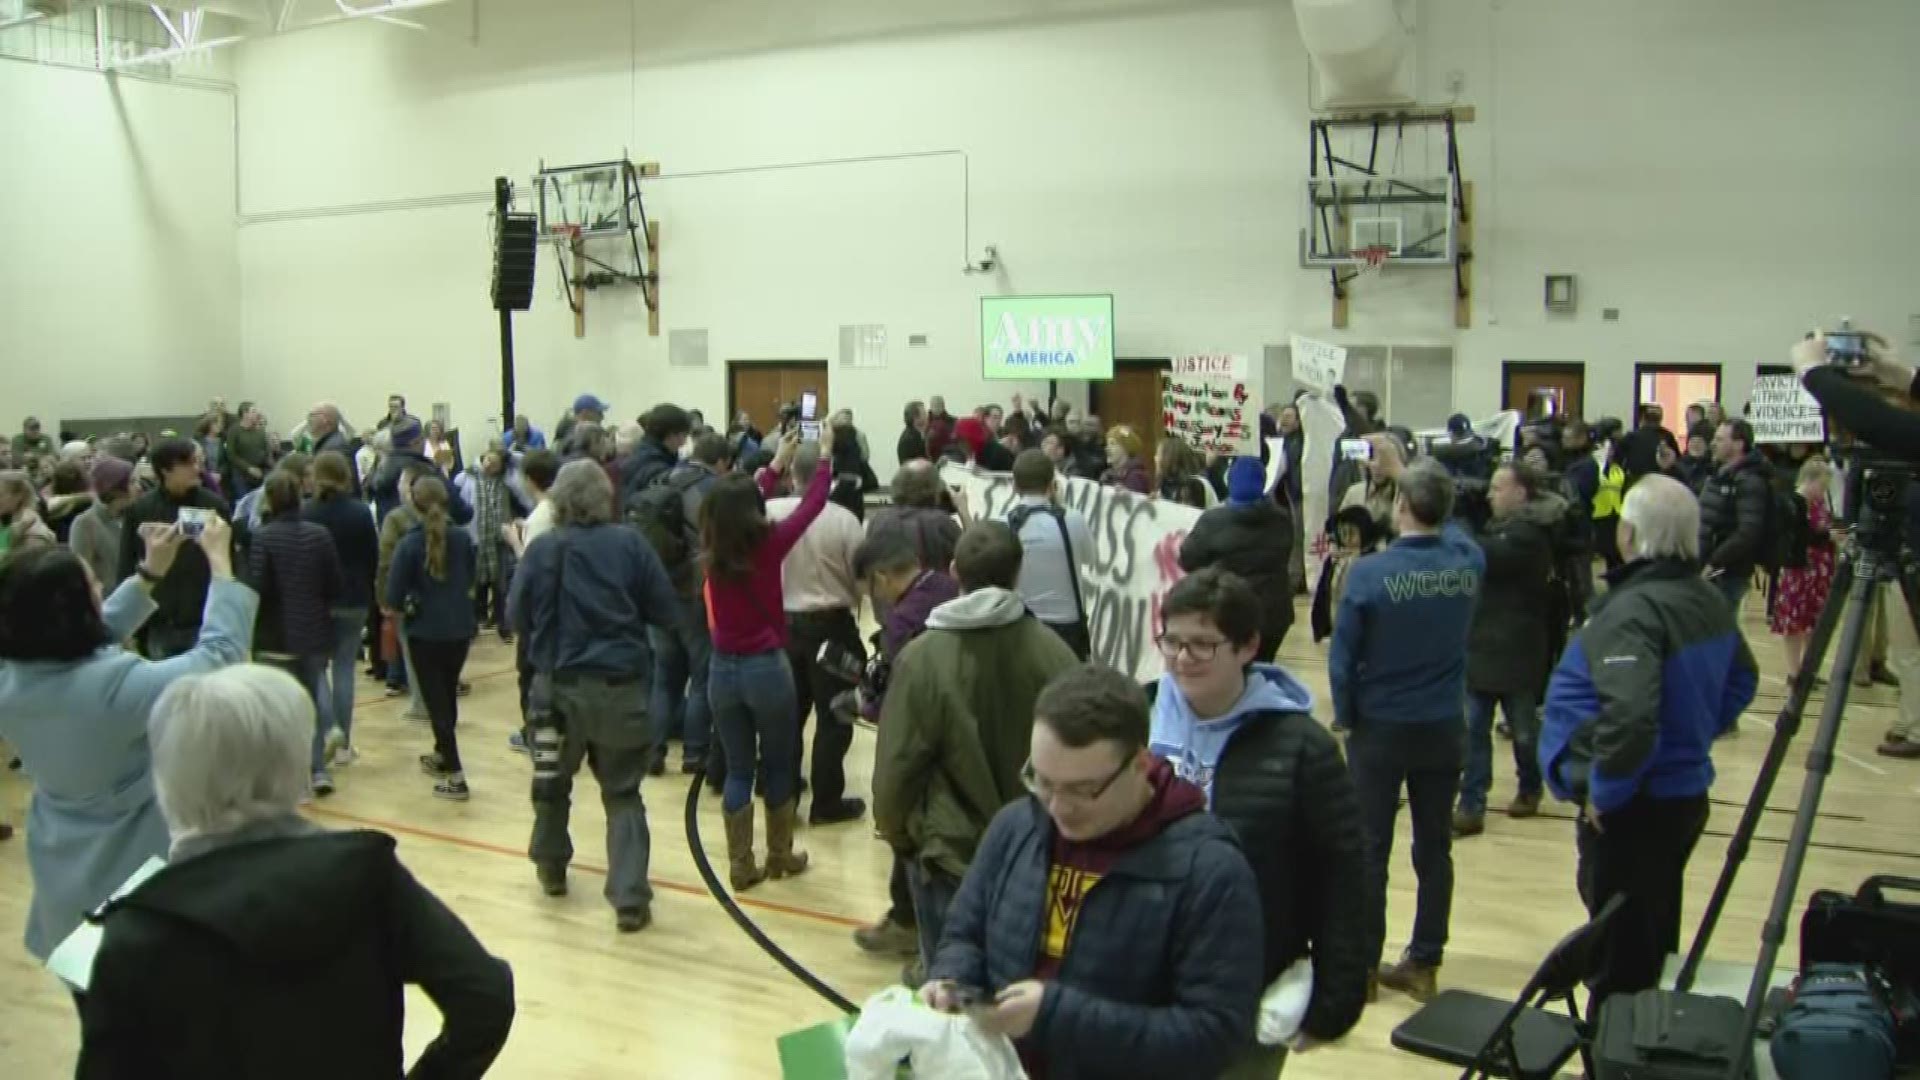 Minnesota activists held a rally, which led to the cancellation of Amy Klobuchar's pre-Super Tuesday campaign event at St. Louis Park High School Sunday evening.